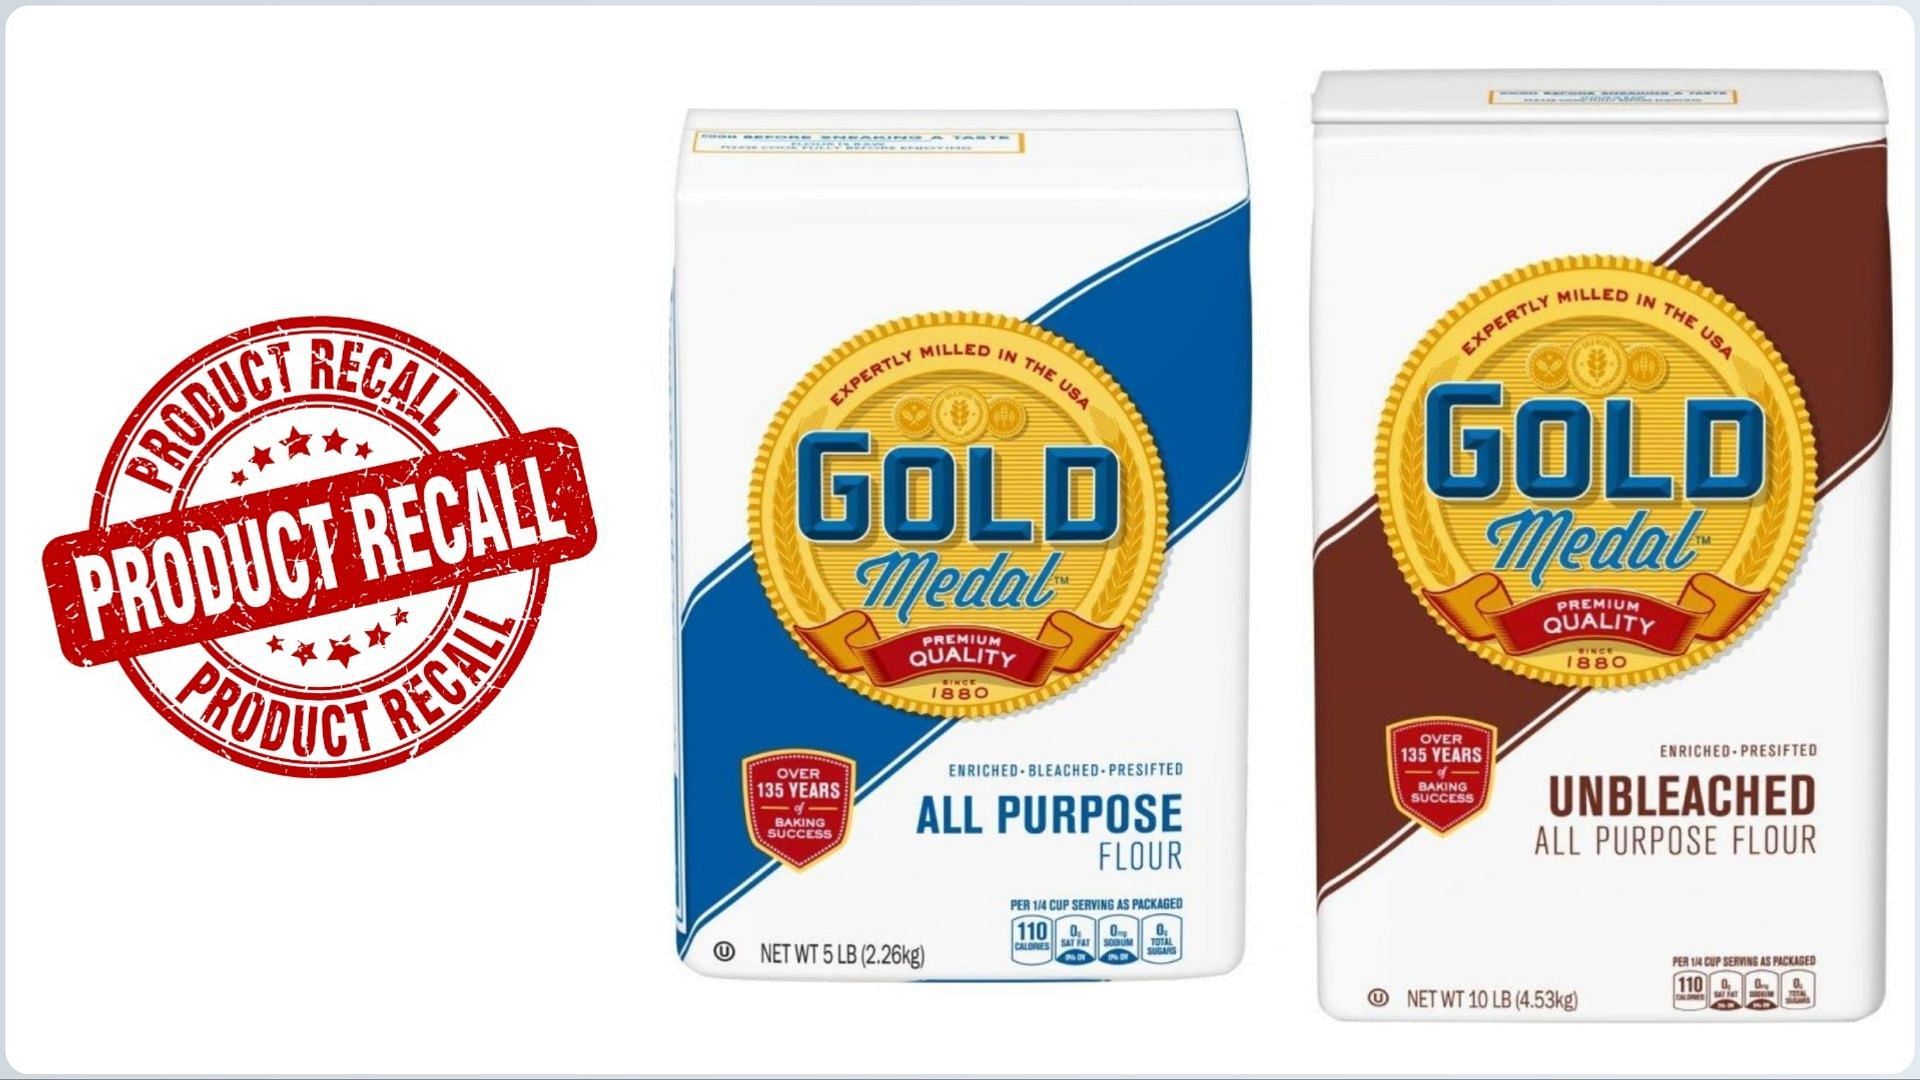 General Mills Gold Medal flour recall reason, UPC code, refund, and